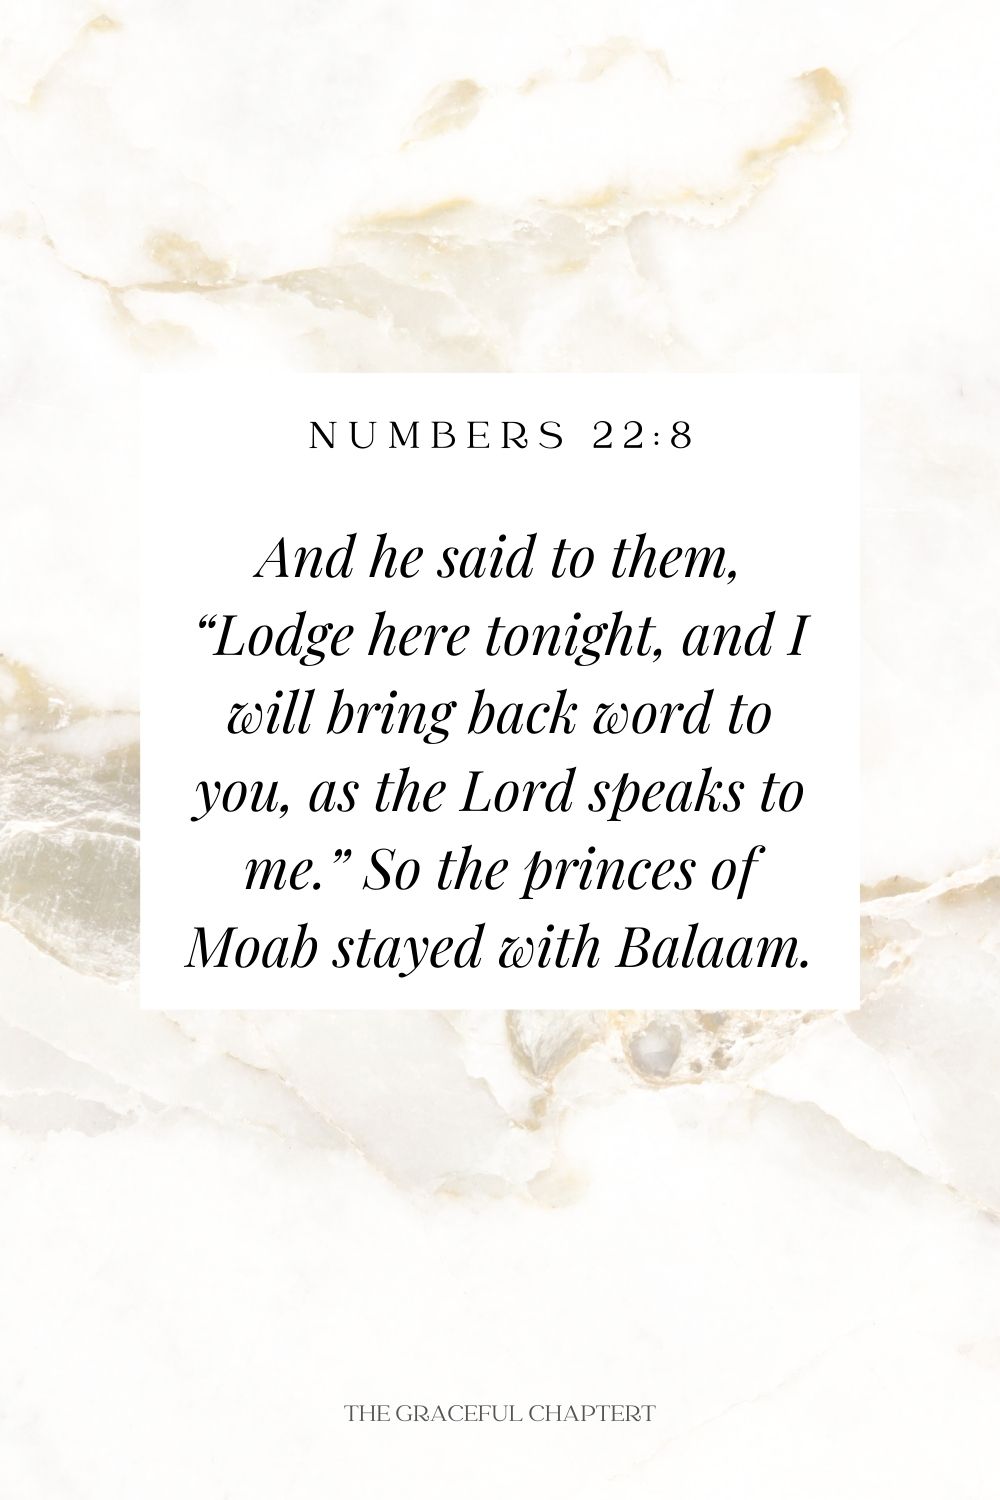 And he said to them, “Lodge here tonight, and I will bring back word to you, as the Lord speaks to me.” So the princes of Moab stayed with Balaam. Numbers 22:8